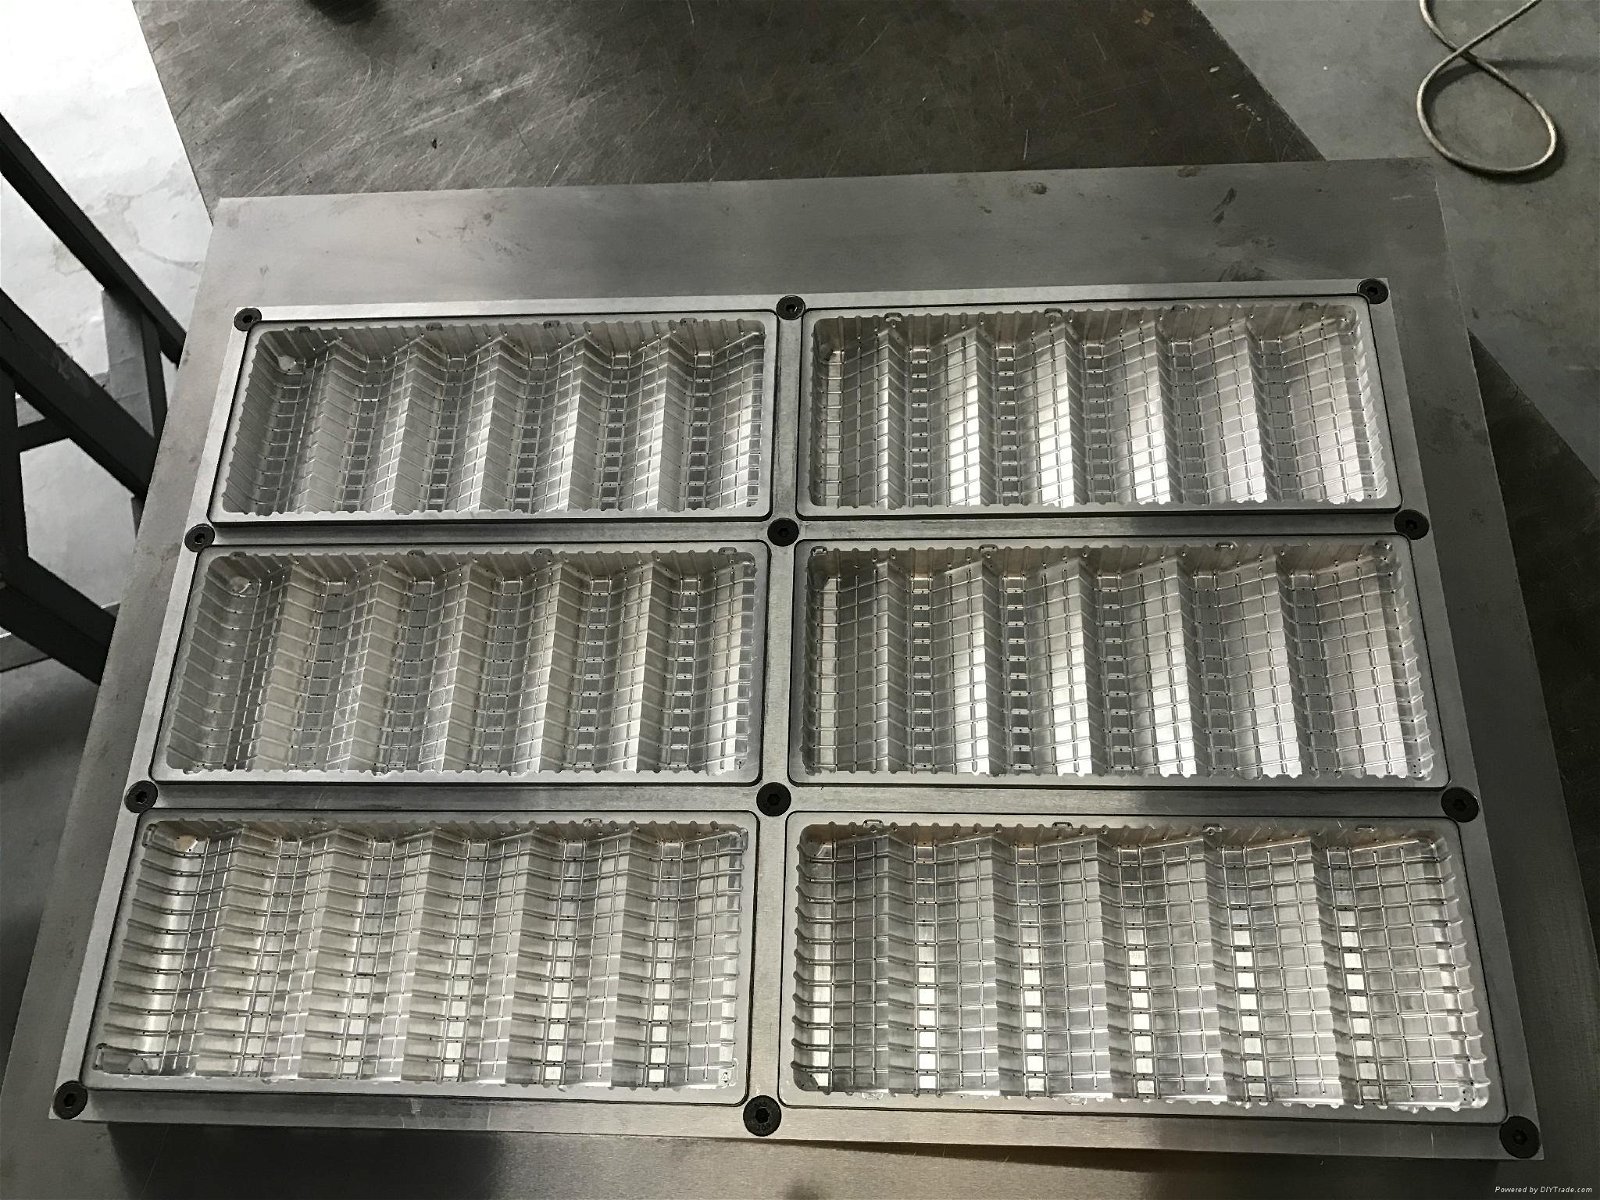 thermoformed food trays